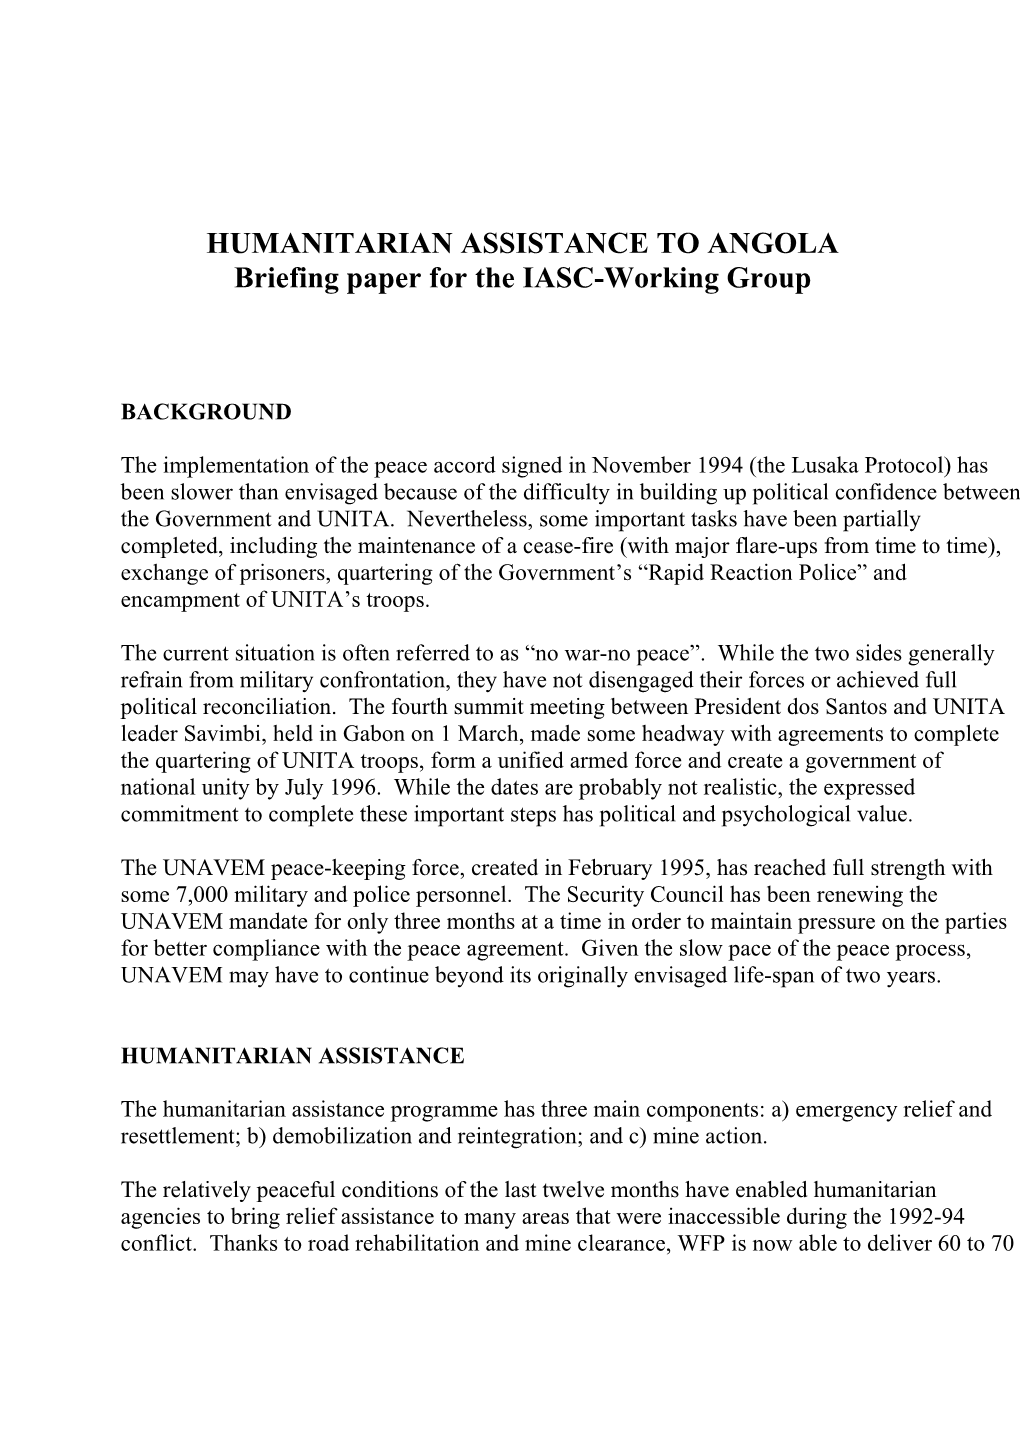 HUMANITARIAN ASSISTANCE to ANGOLA Briefing Paper for the IASC-Working Group